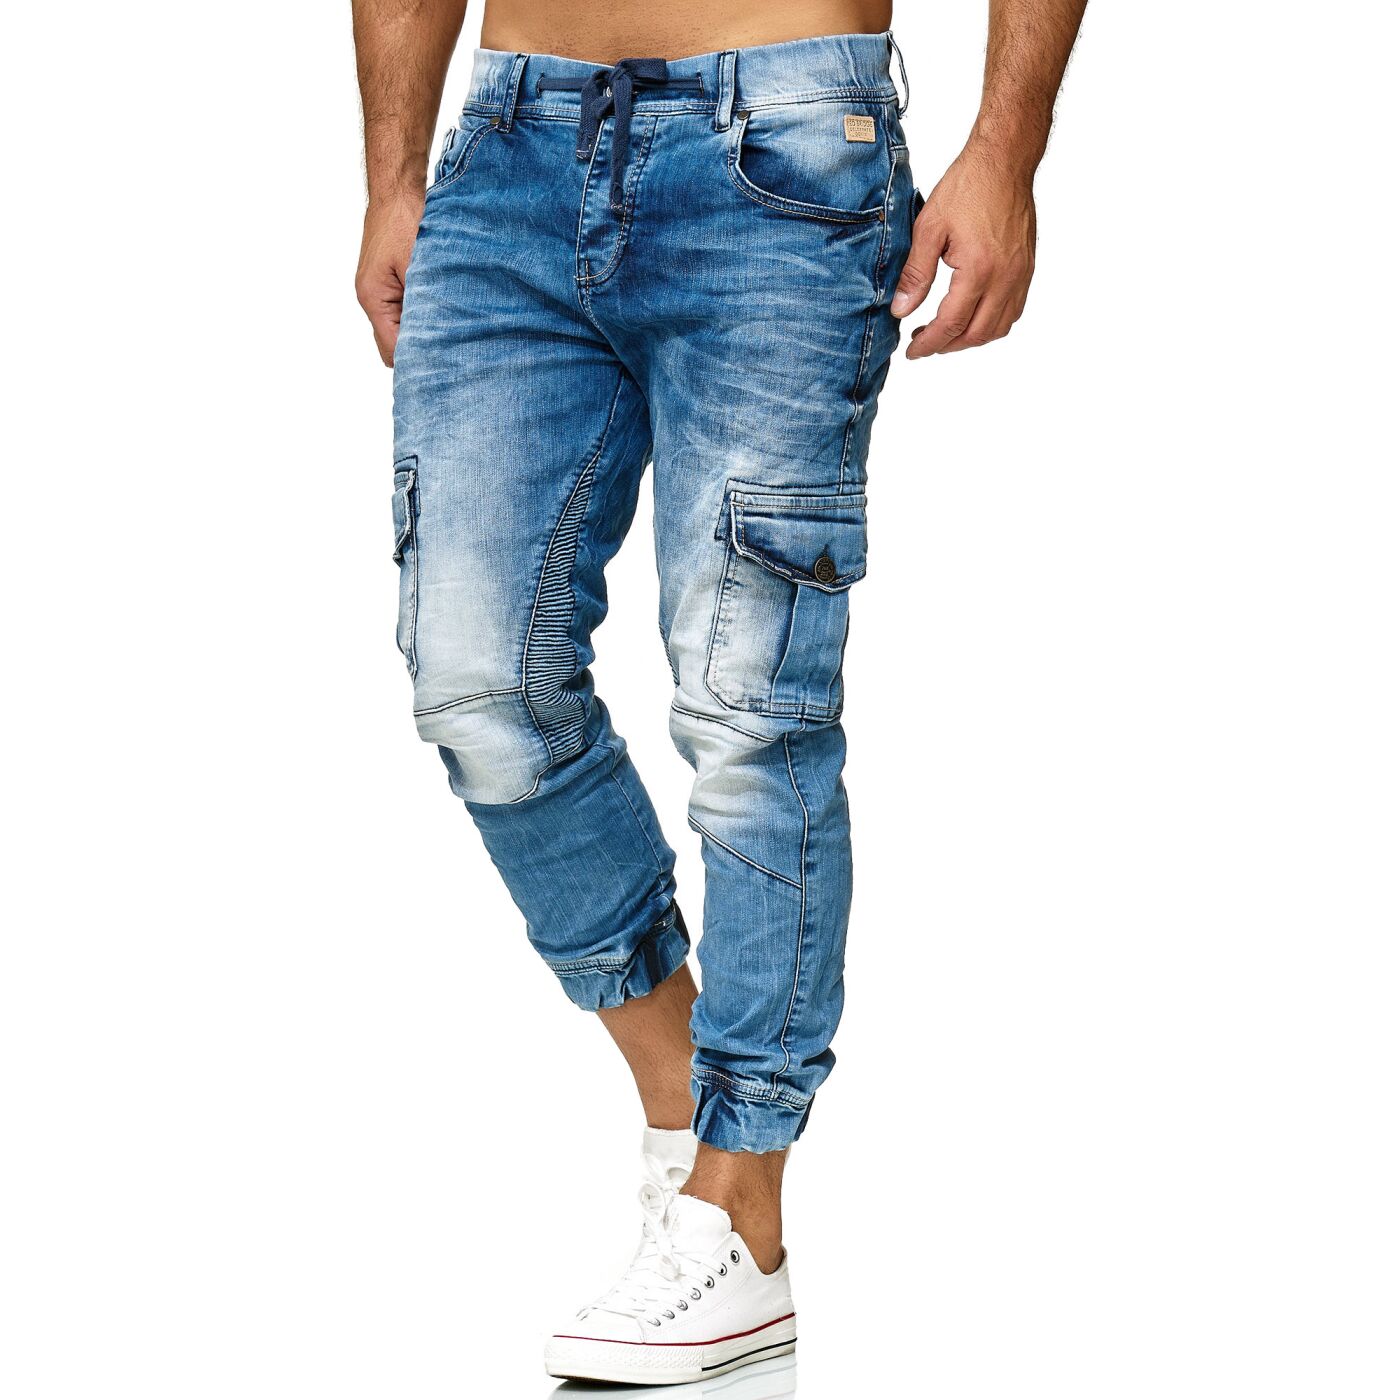 ARTFFEL Mens Casual Mid Waisted Multi-Pockets Harem Relaxed Fit Jogger Denim Jeans Pants